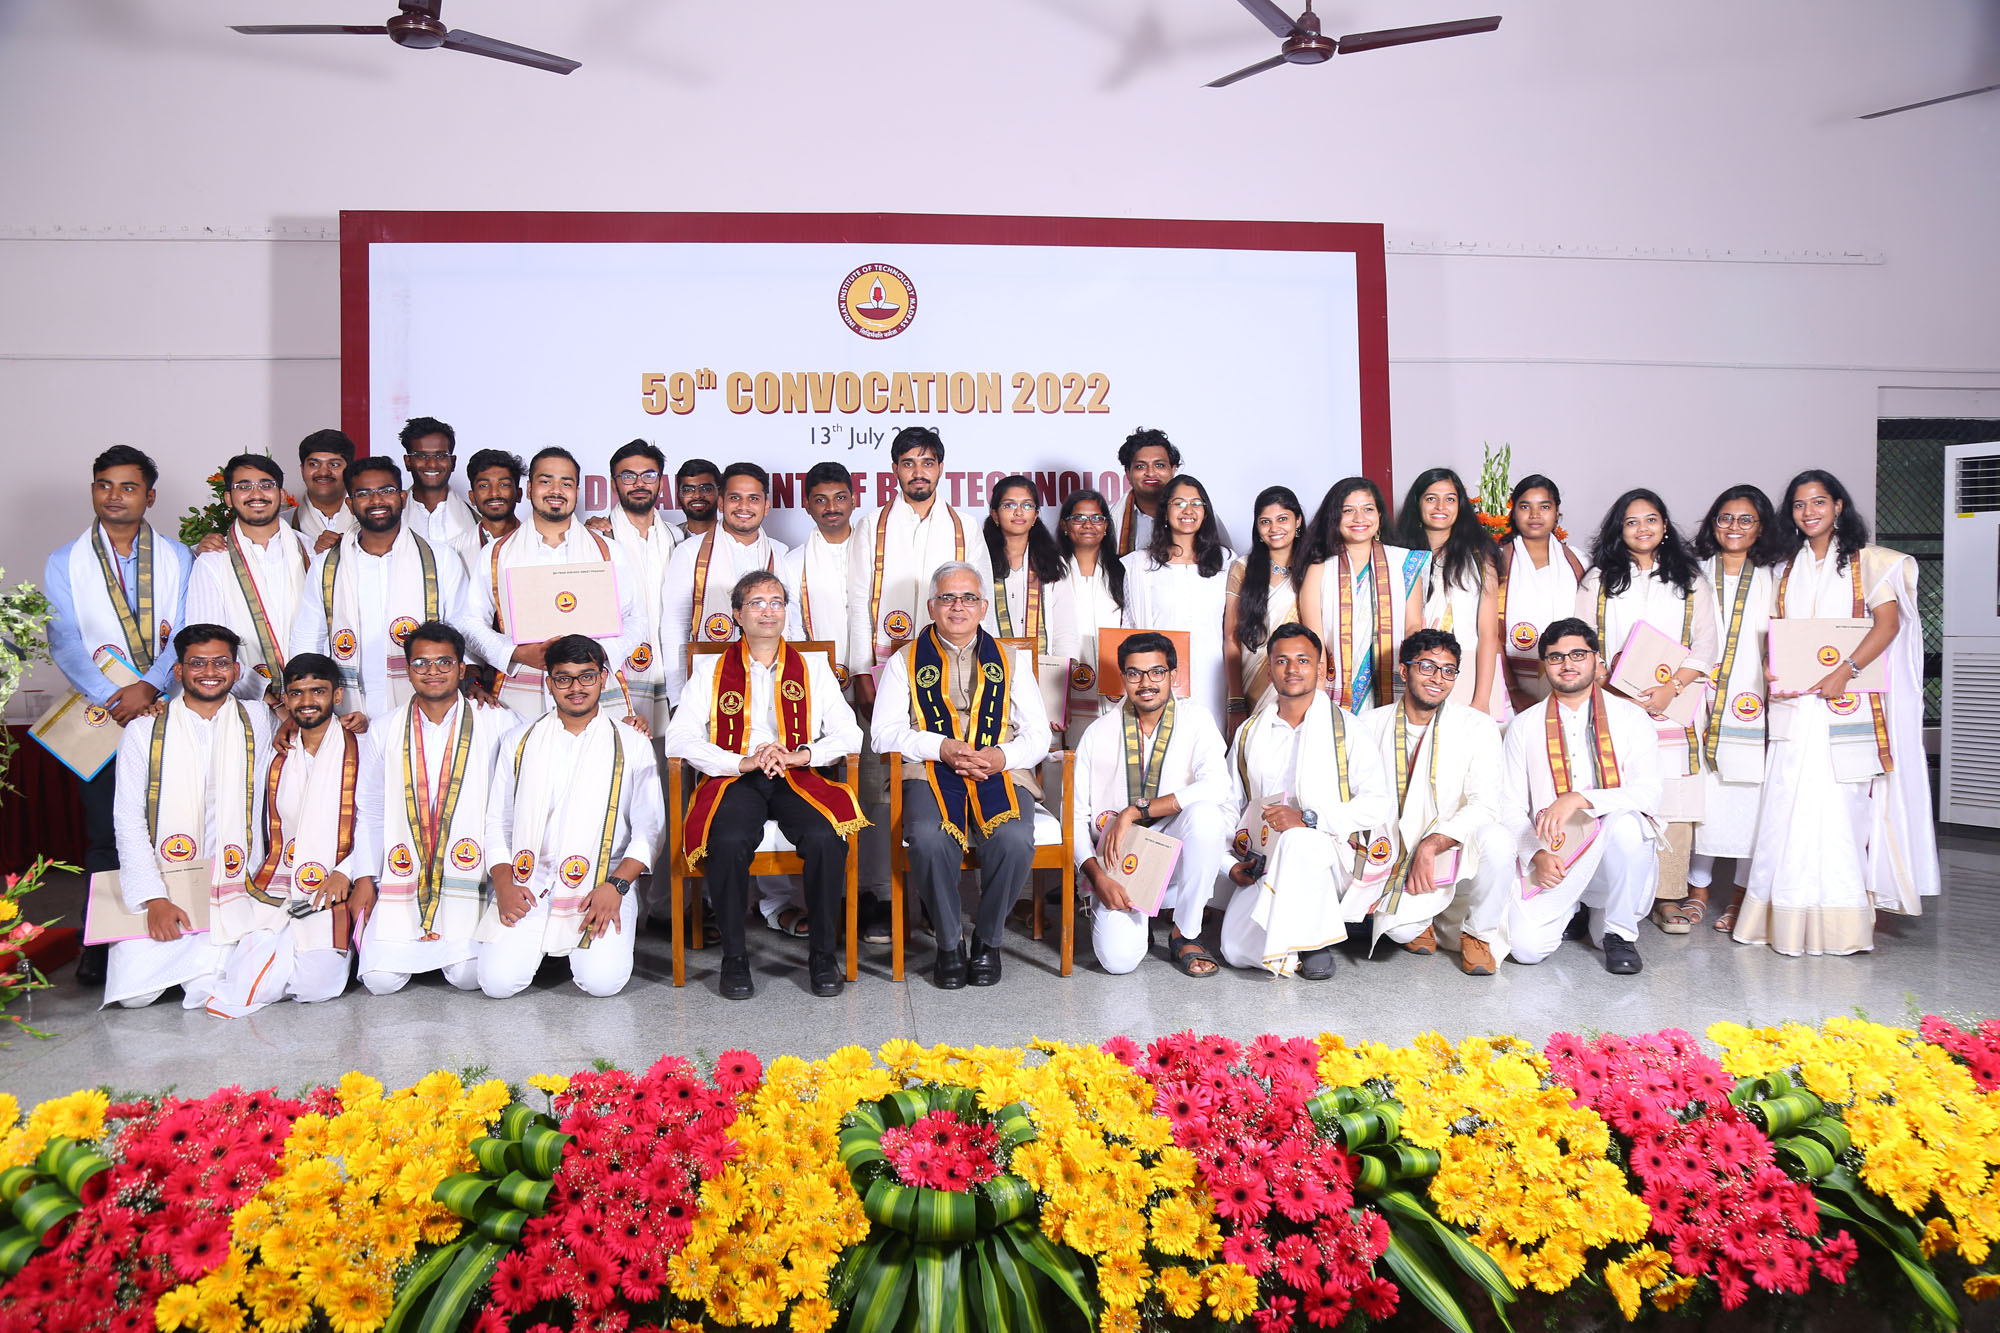 D3P 59thConvocation 2022 Please click here to view the videos